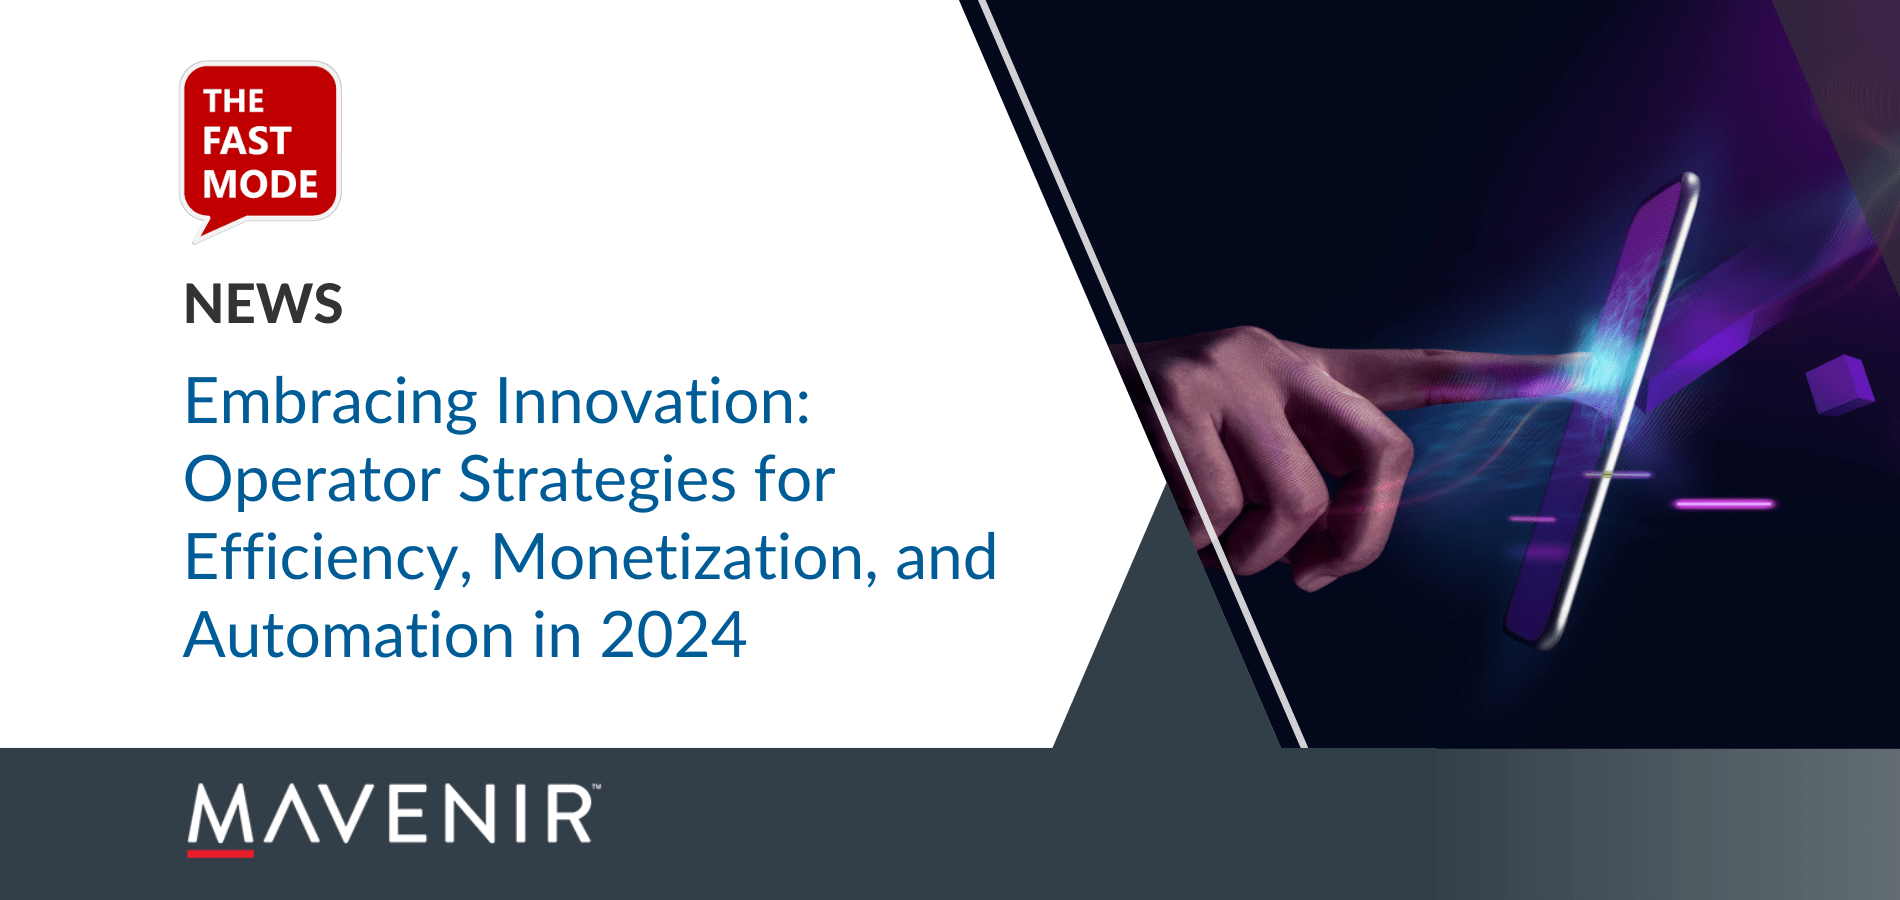 Embracing Innovation Operator Strategies for Efficiency, Monetization, and Automation in 2024